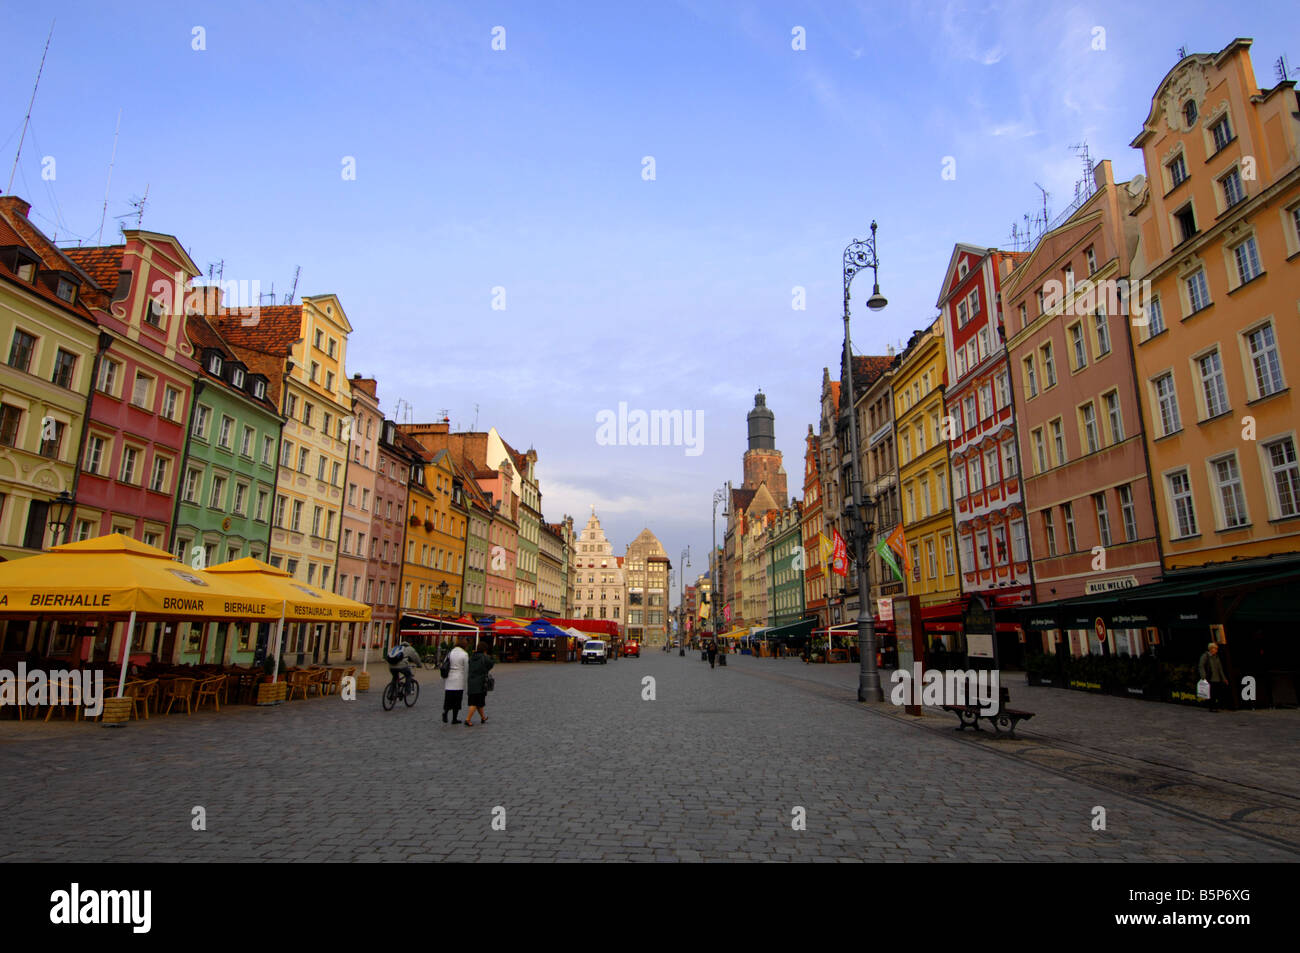 Rynek Square, Wroclaw, Pologne Banque D'Images